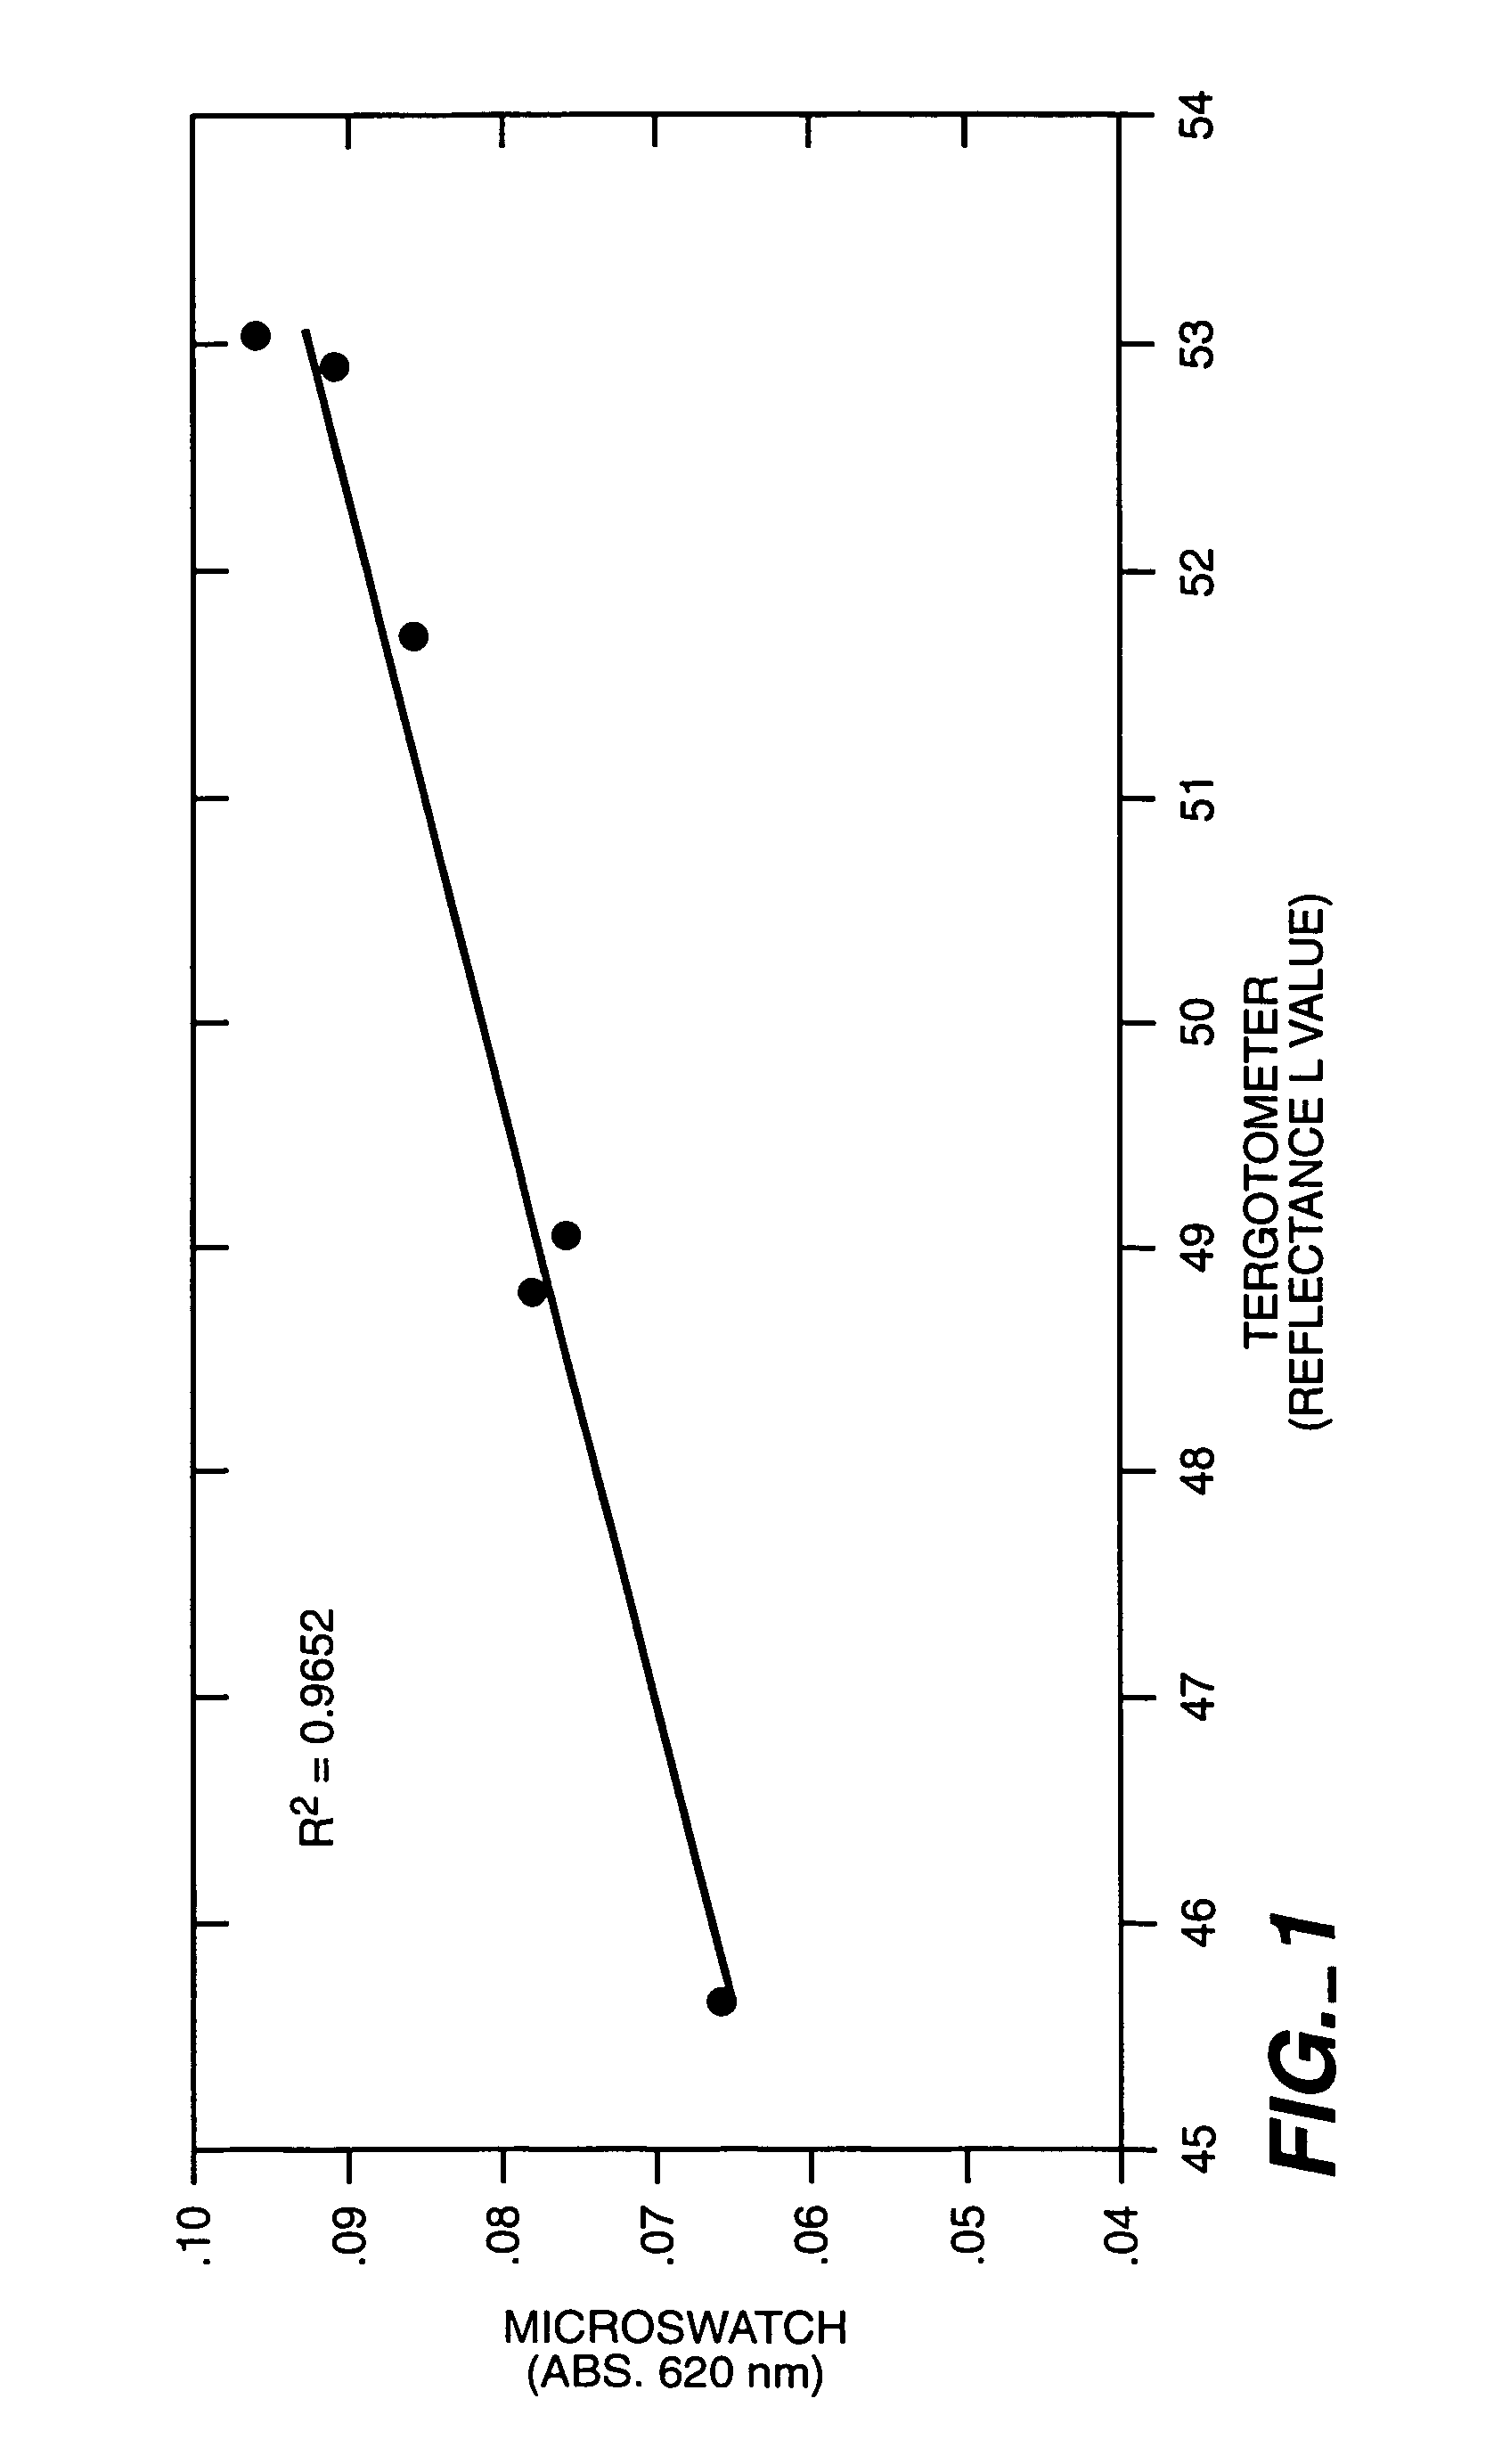 Method of assaying wash performance of enzymes on a microtiter plate